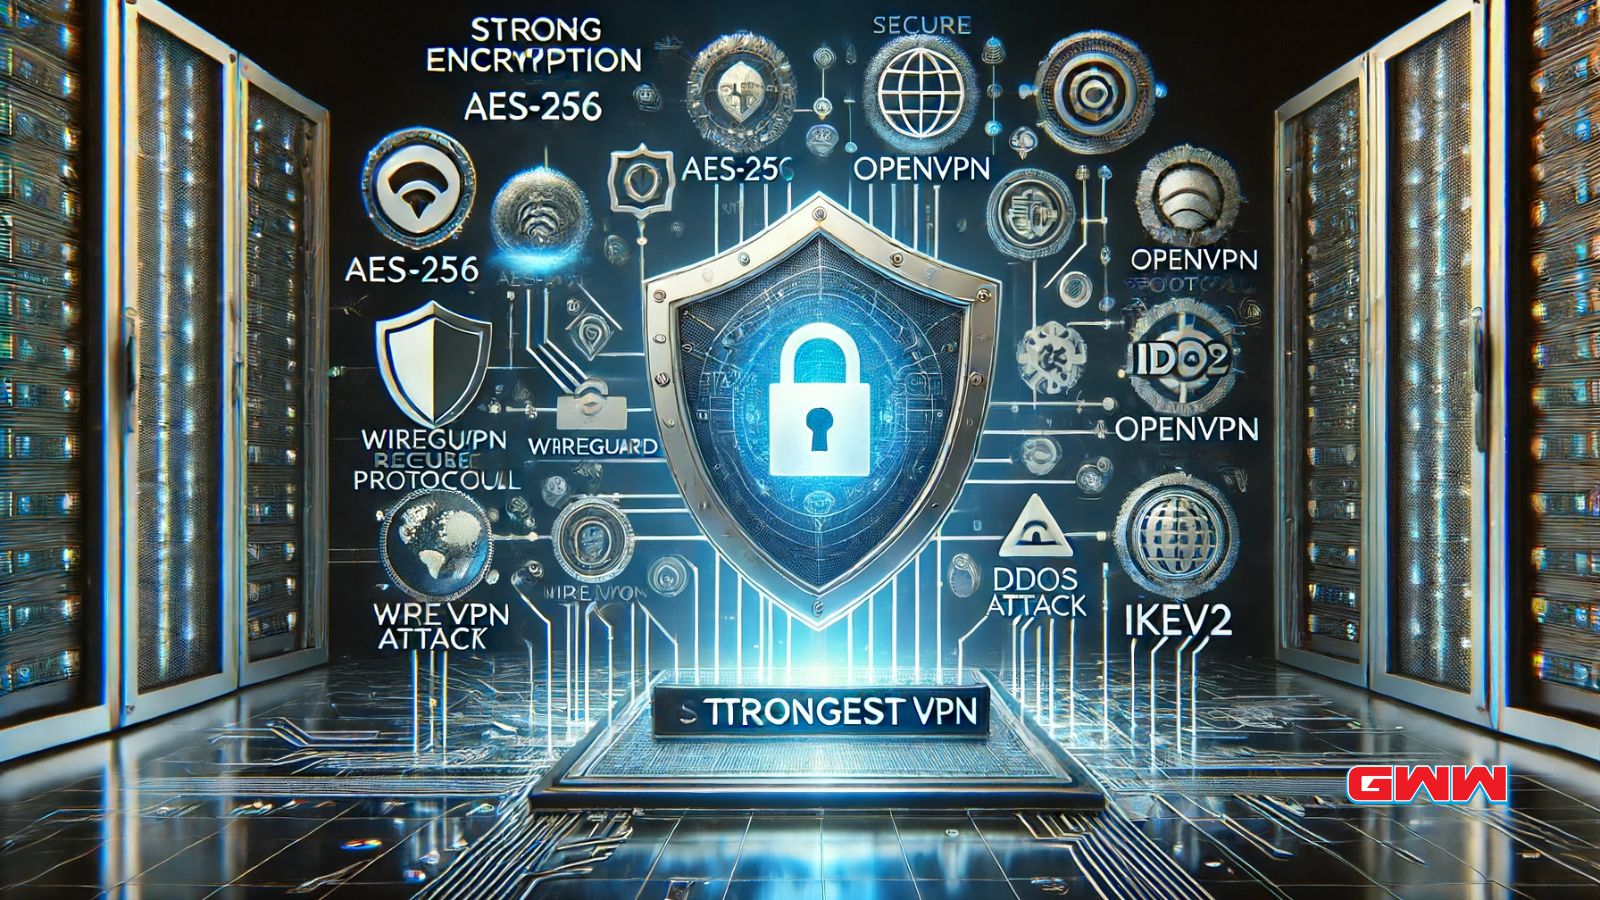 Strongest VPN with encryption and security protocol icons